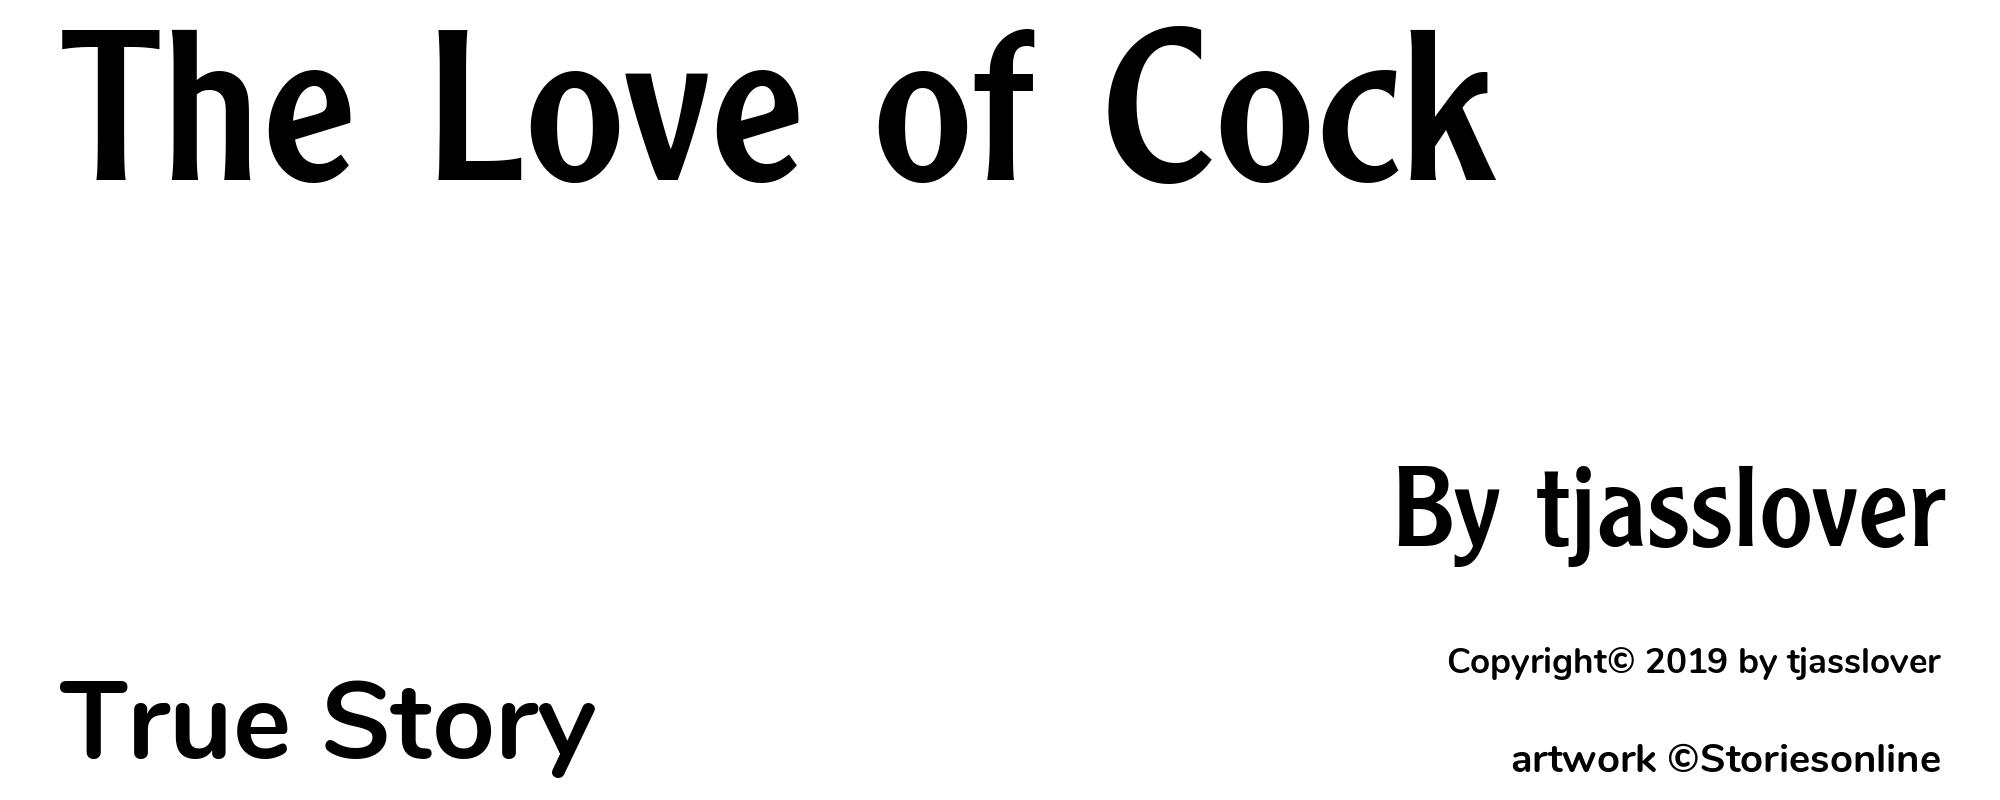 The Love of Cock - Cover